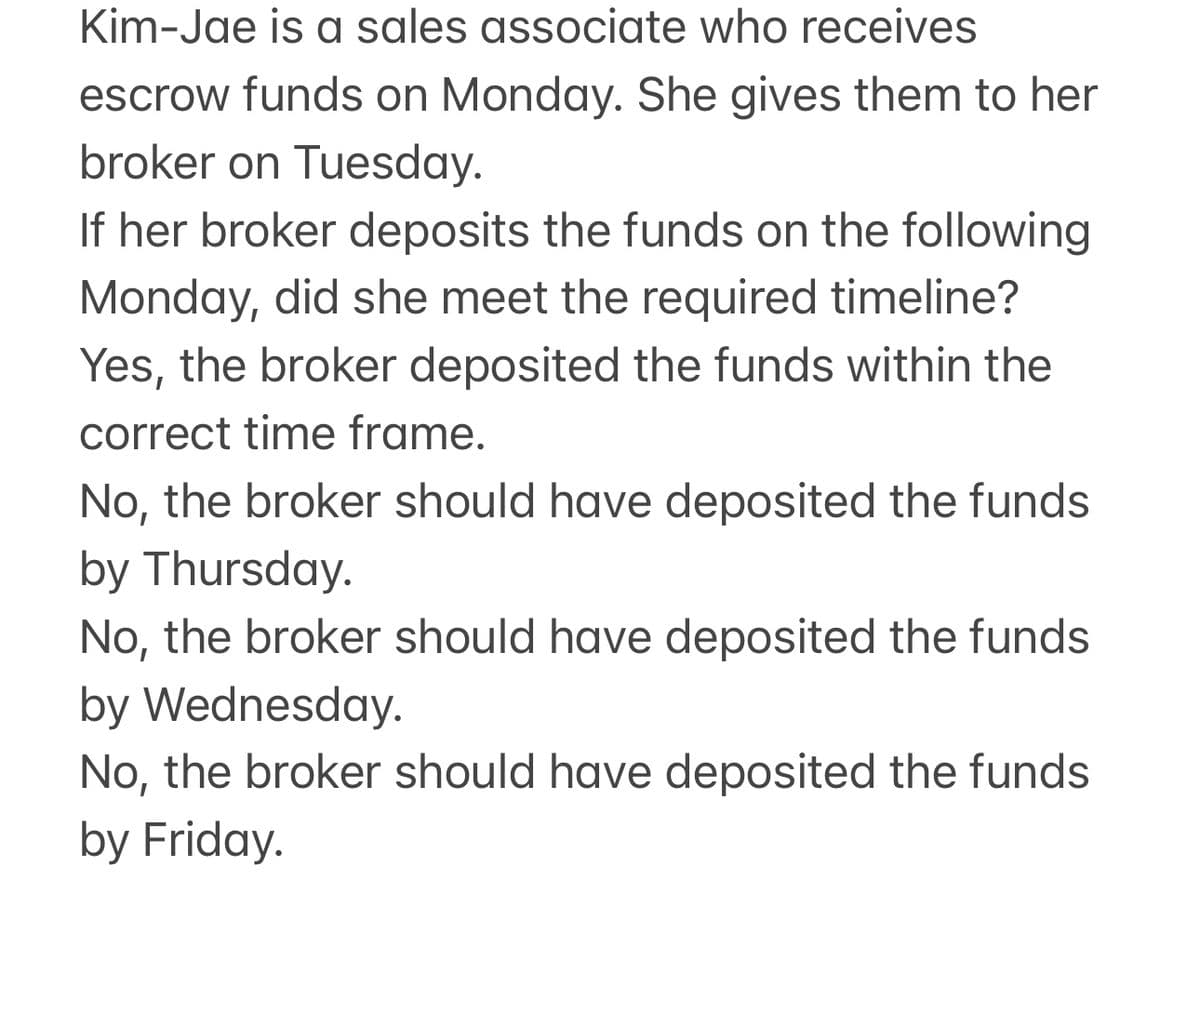 Kim-Jae is a sales associate who receives
escrow funds on Monday. She gives them to her
broker on Tuesday.
If her broker deposits the funds on the following
Monday, did she meet the required timeline?
Yes, the broker deposited the funds within the
correct time frame.
No, the broker should have deposited the funds
by Thursday.
No, the broker should have deposited the funds
by Wednesday.
No, the broker should have deposited the funds
by Friday.